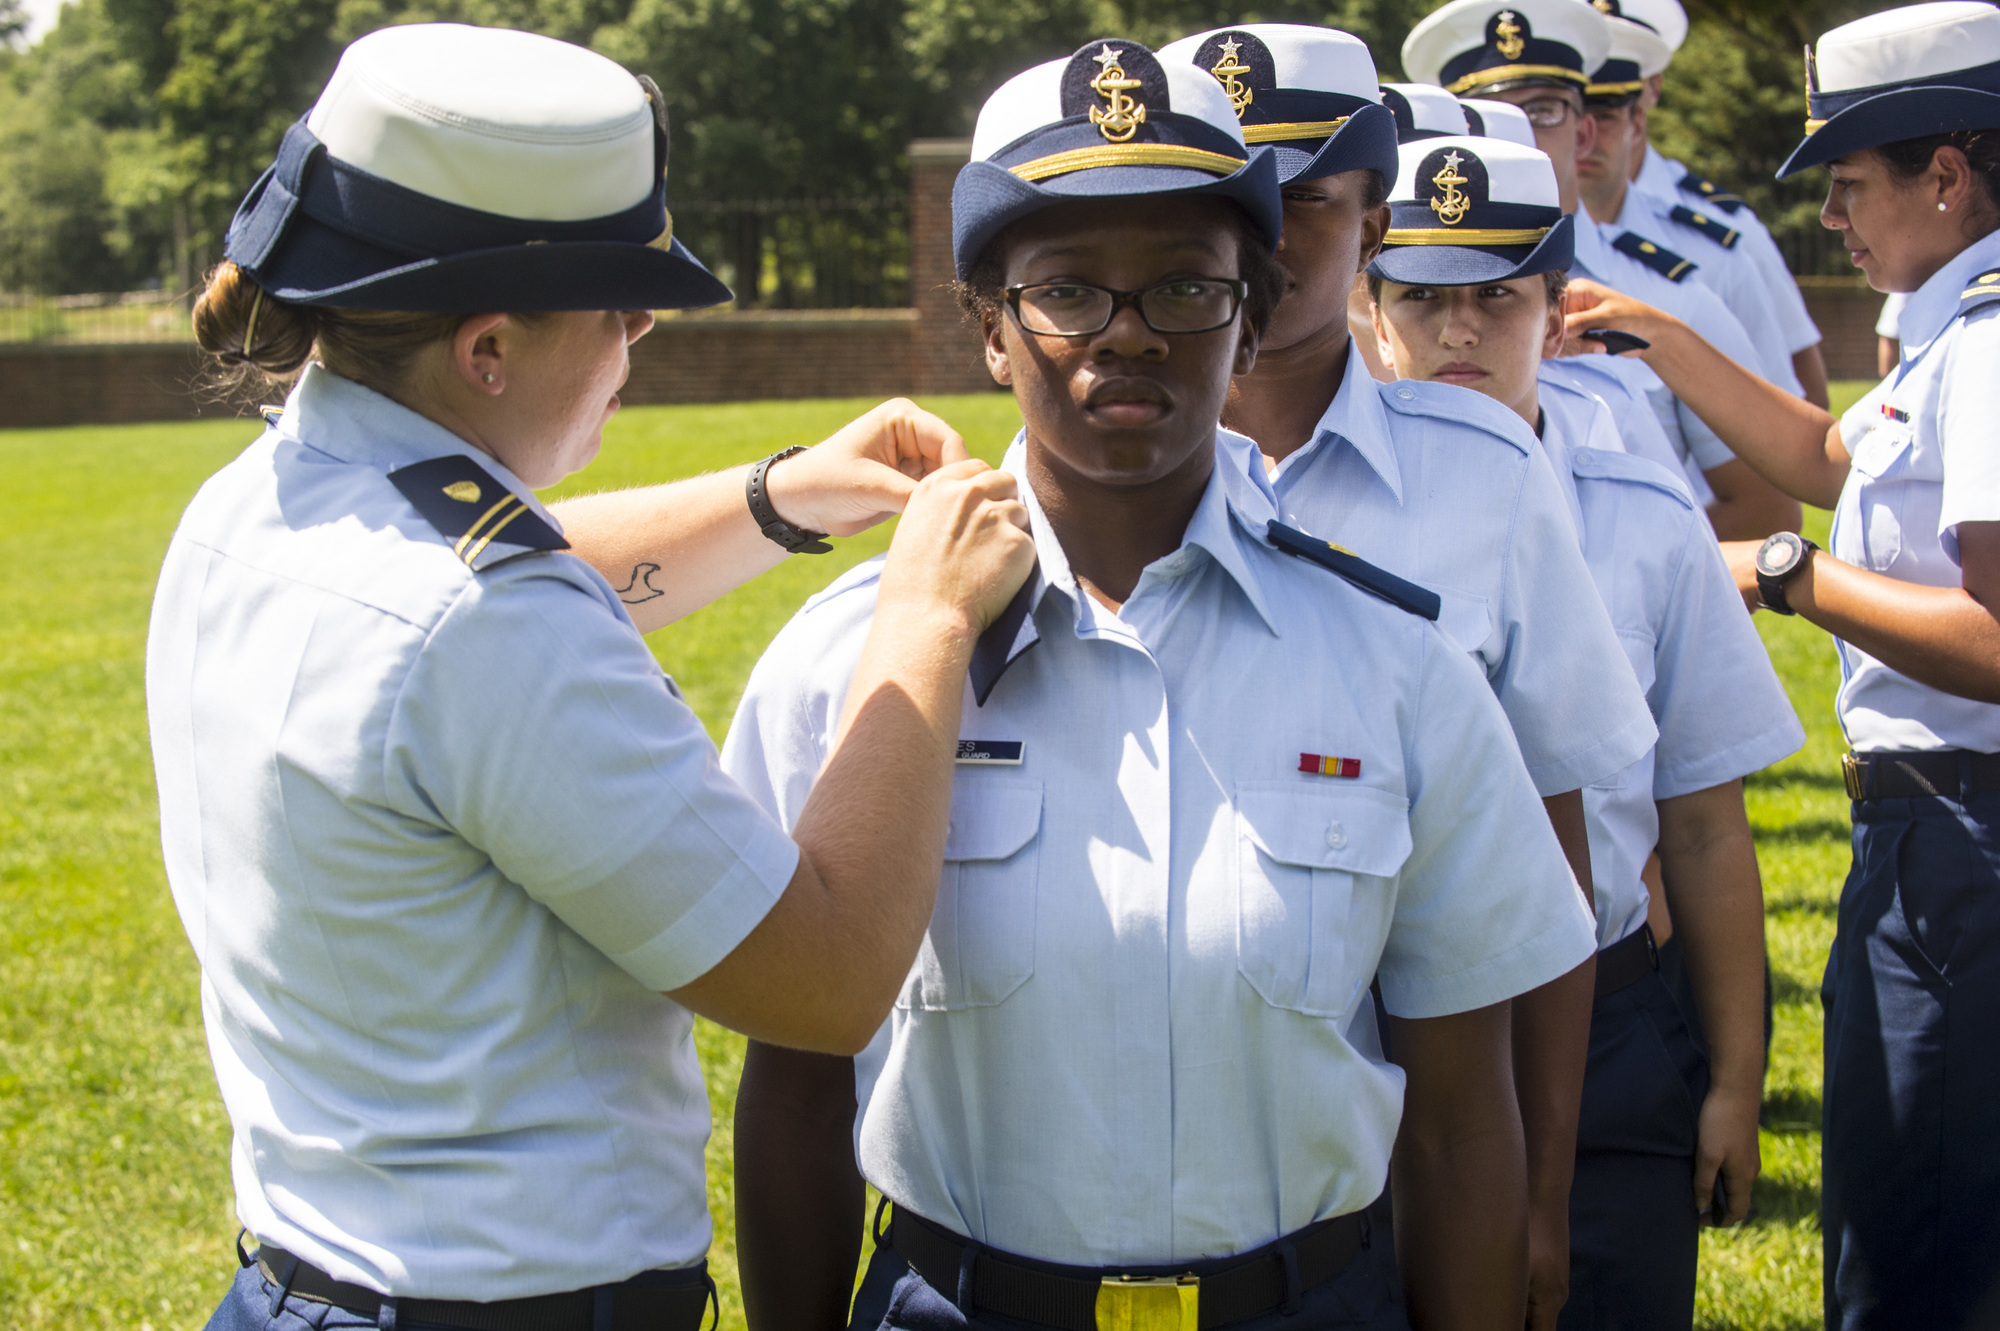 U.S. Coast Guard Academy Class of 2020 cadets received their shoulder boards in a ceremony at the Academy, Aug 15, 2016. 